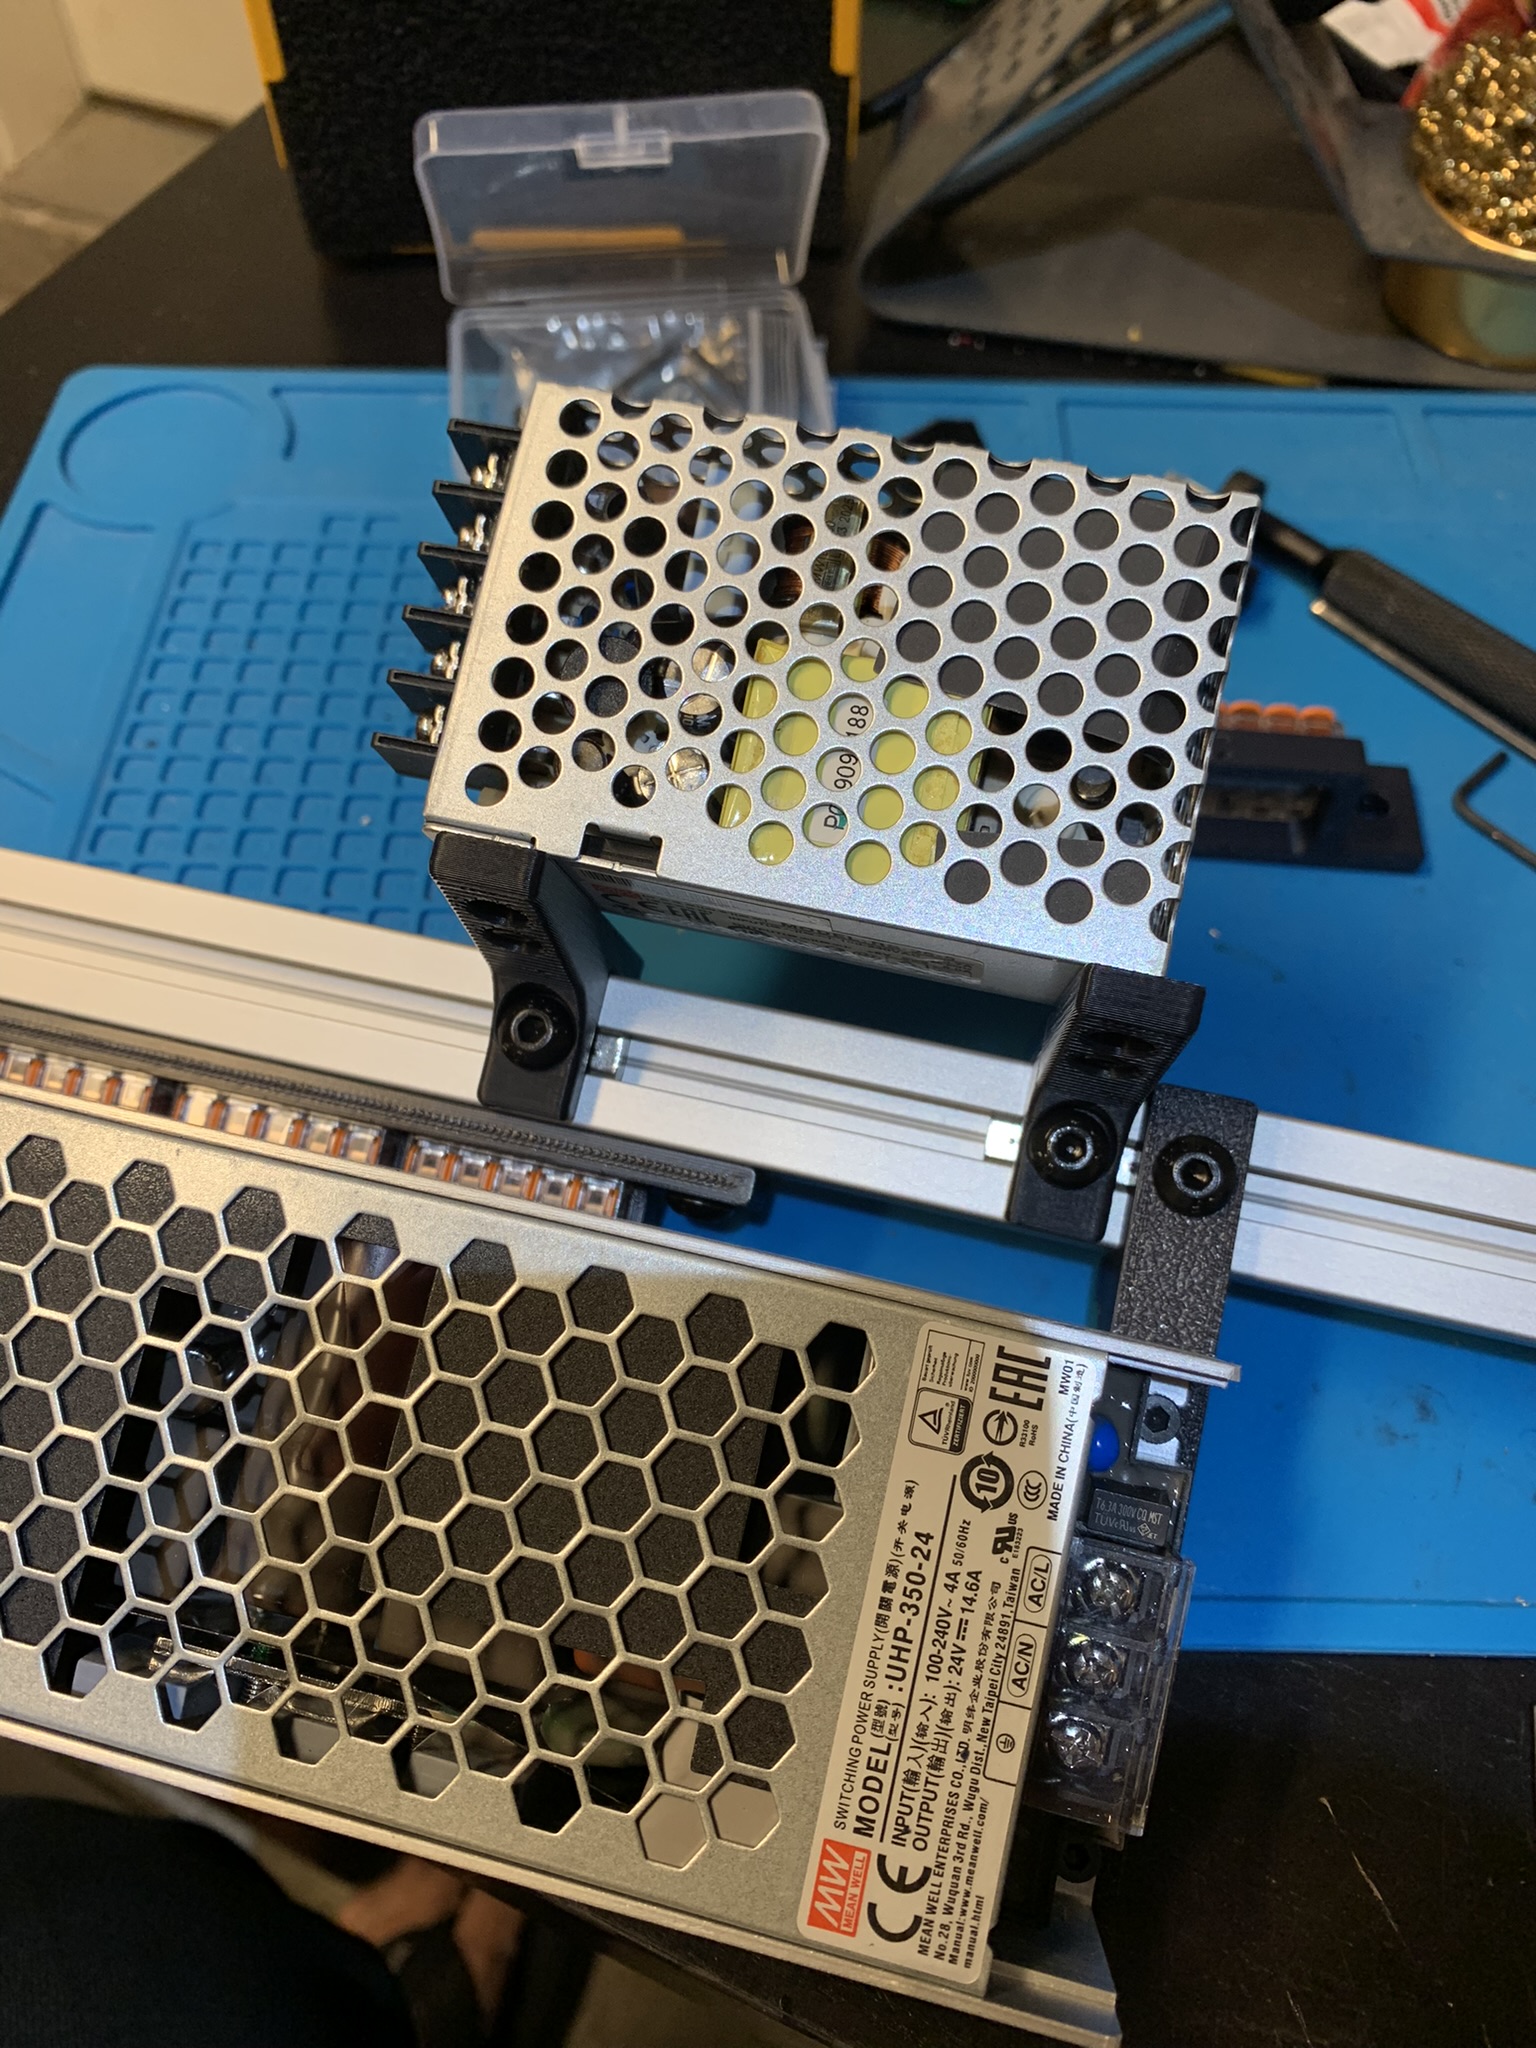 Mounts attached to the extrusion at the top